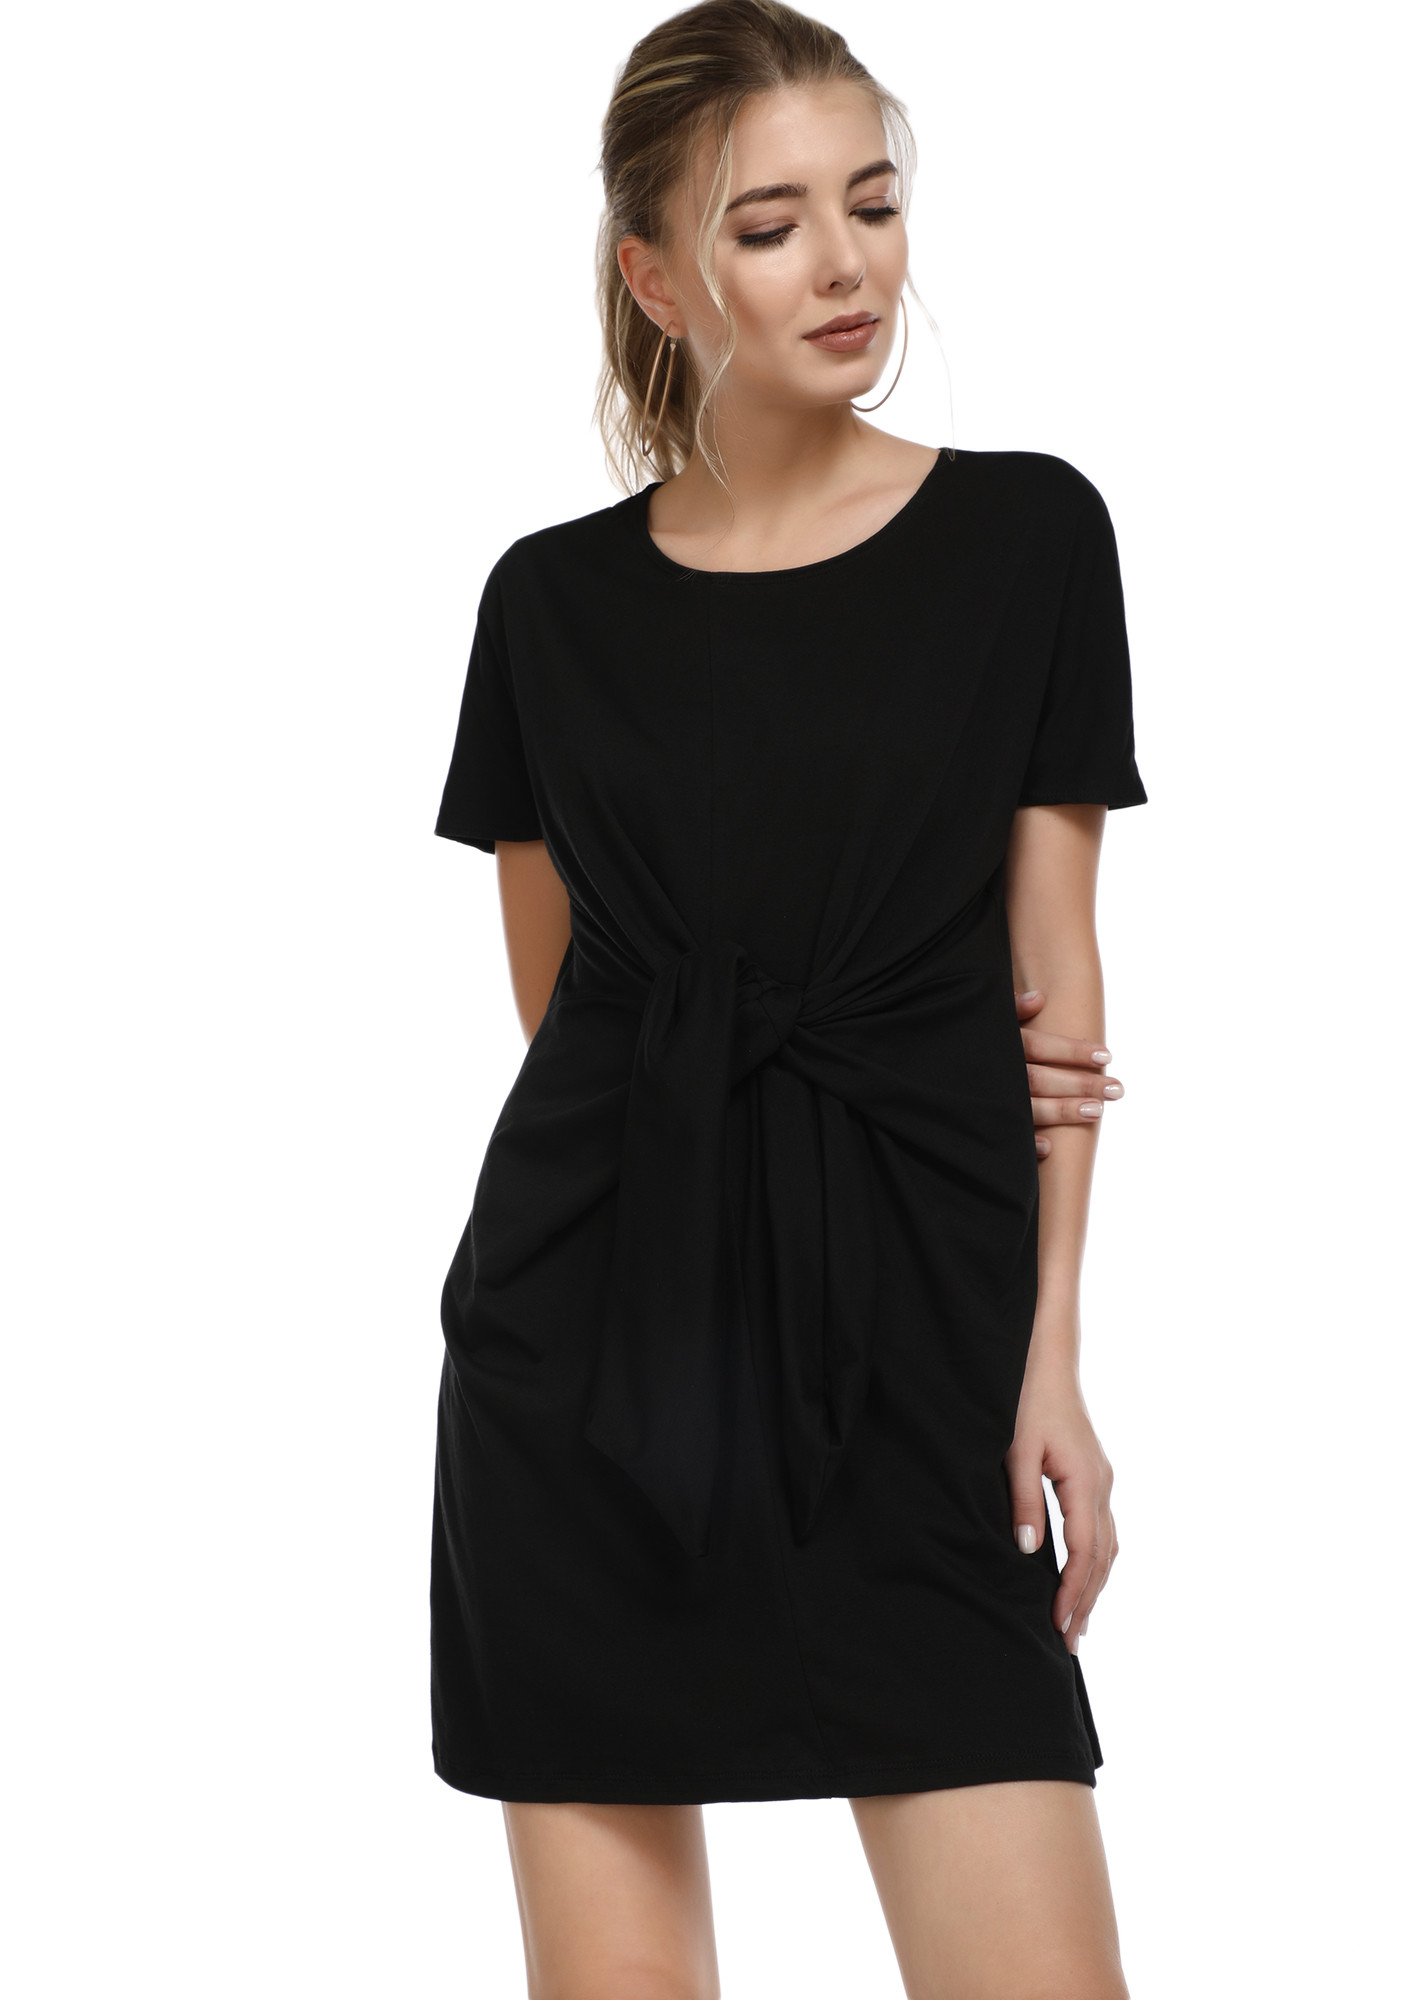 GO OUT WIMME GIRL BLACK SHIFT DRESS